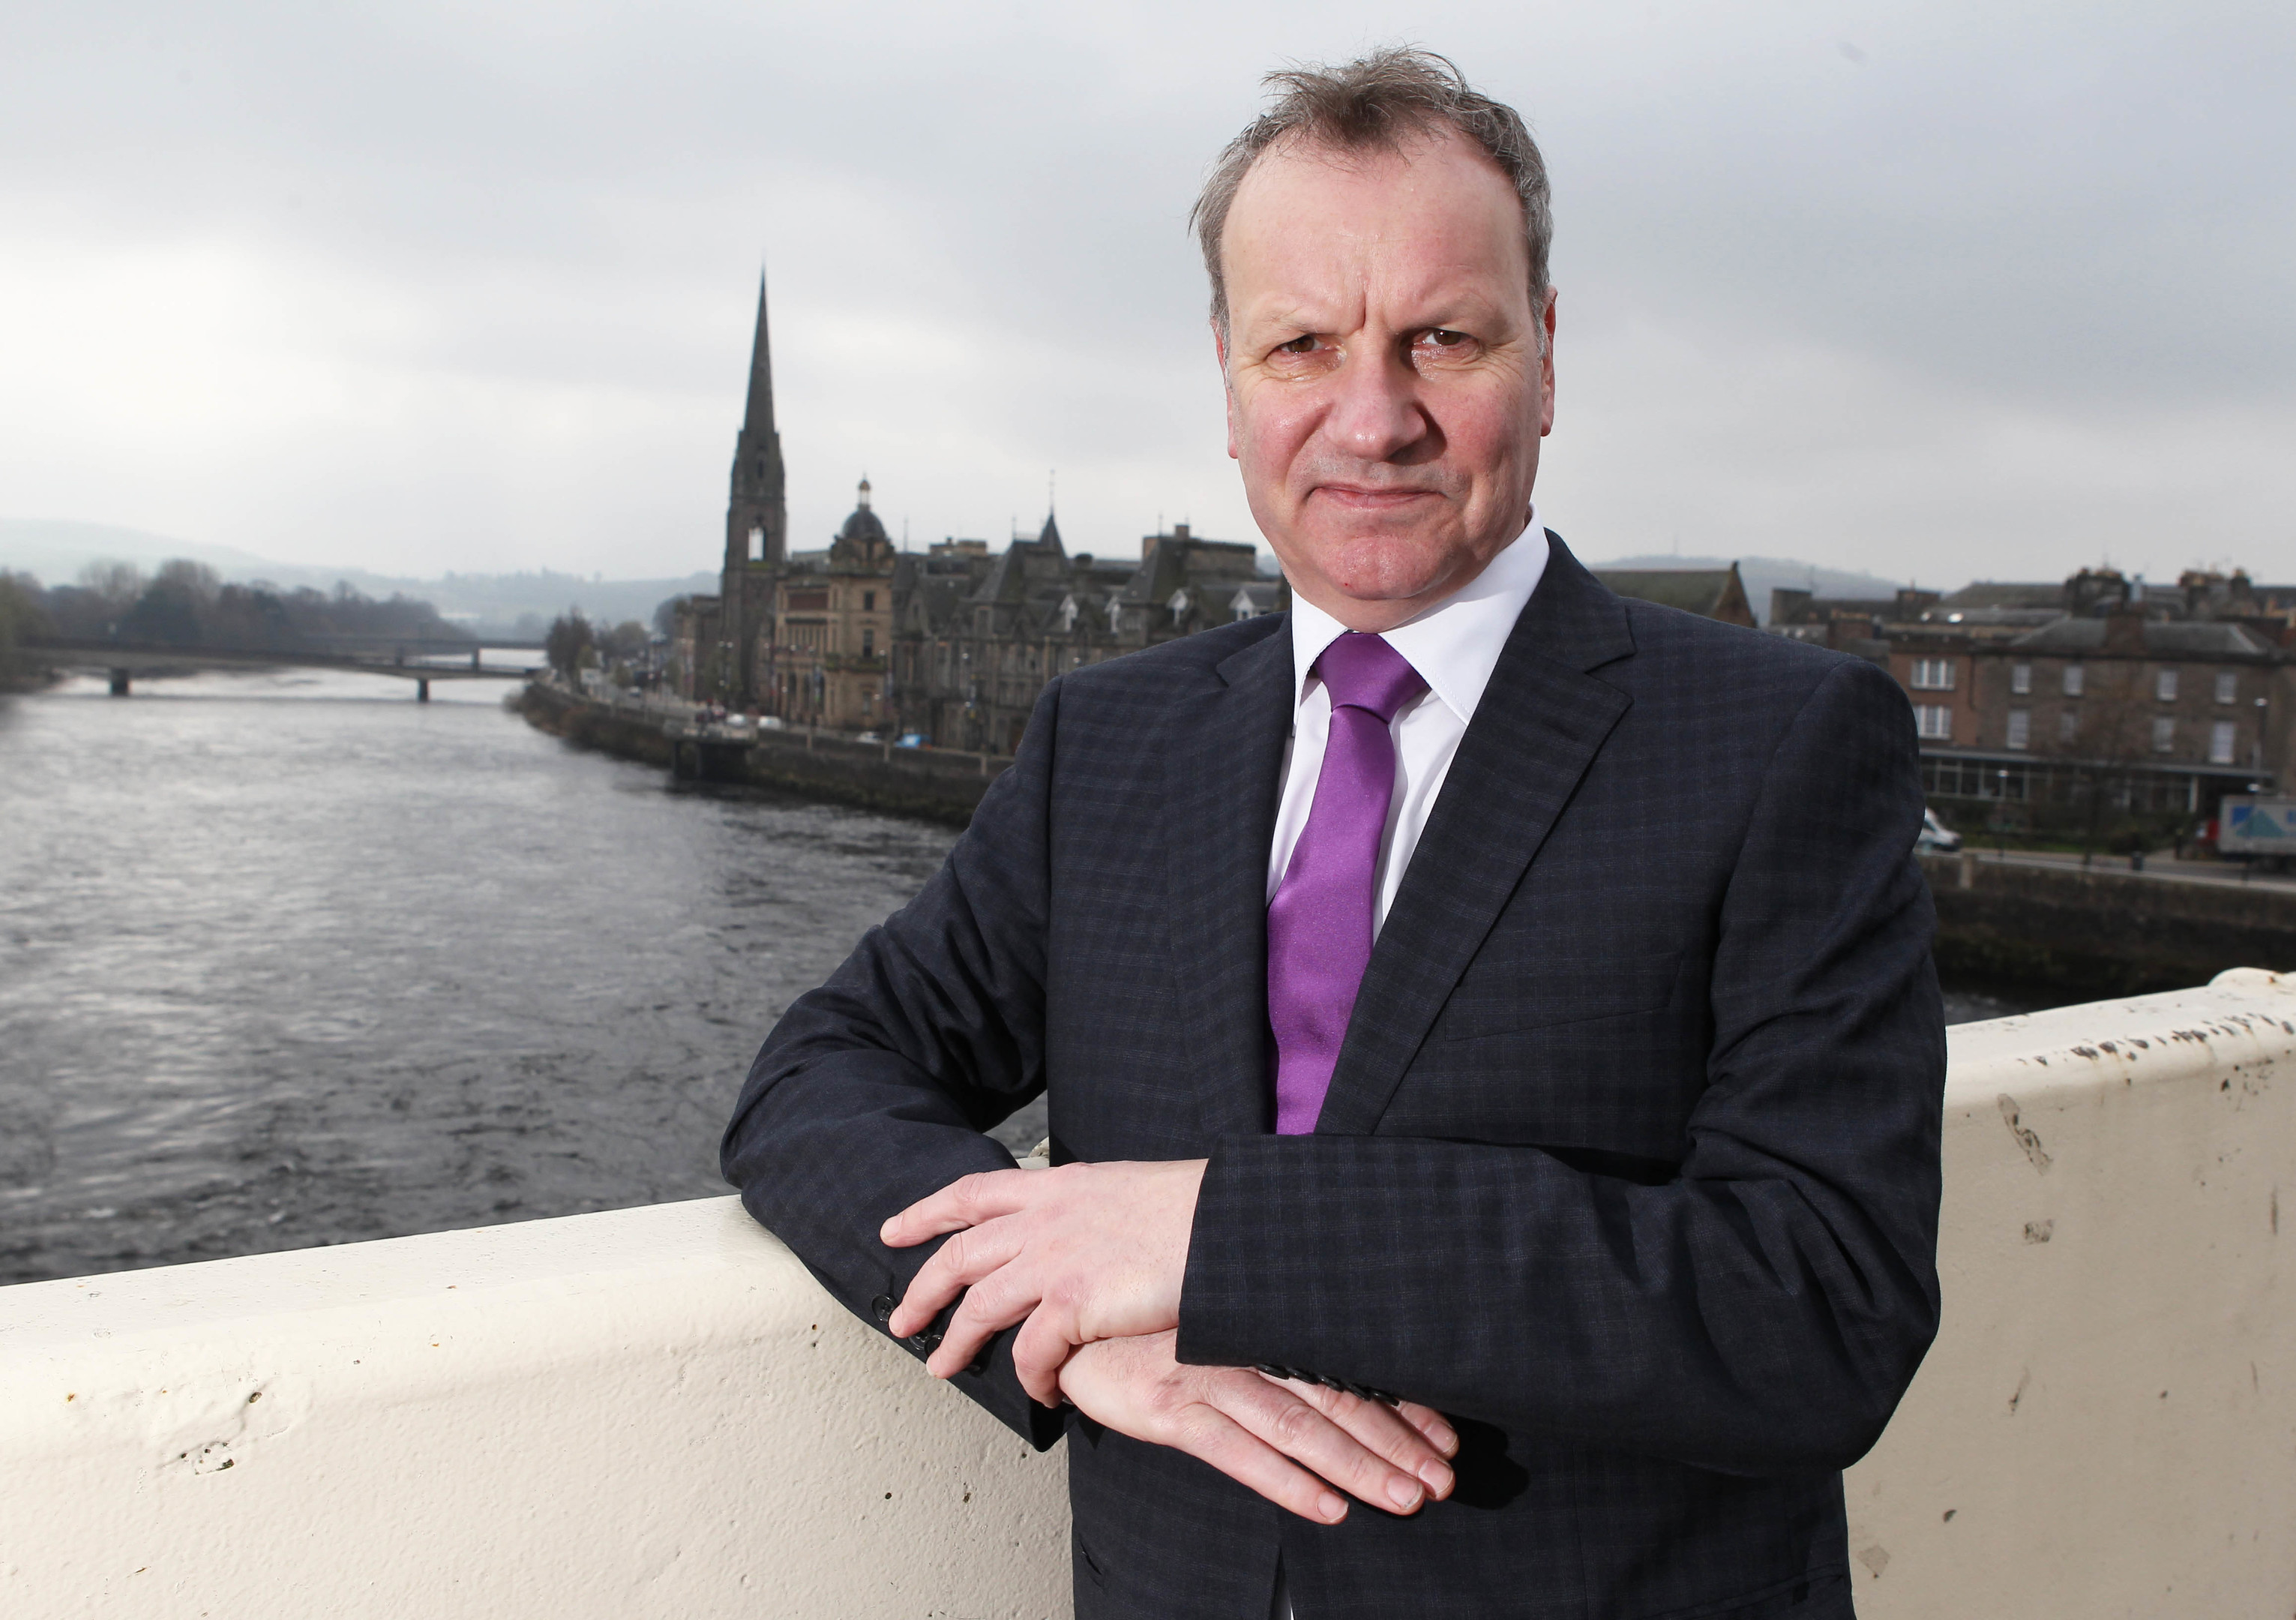 Pete Wishart, SNP MP and ex Runrig rock star in his local constituency of Perth (Chris Austin / DC Thomson)